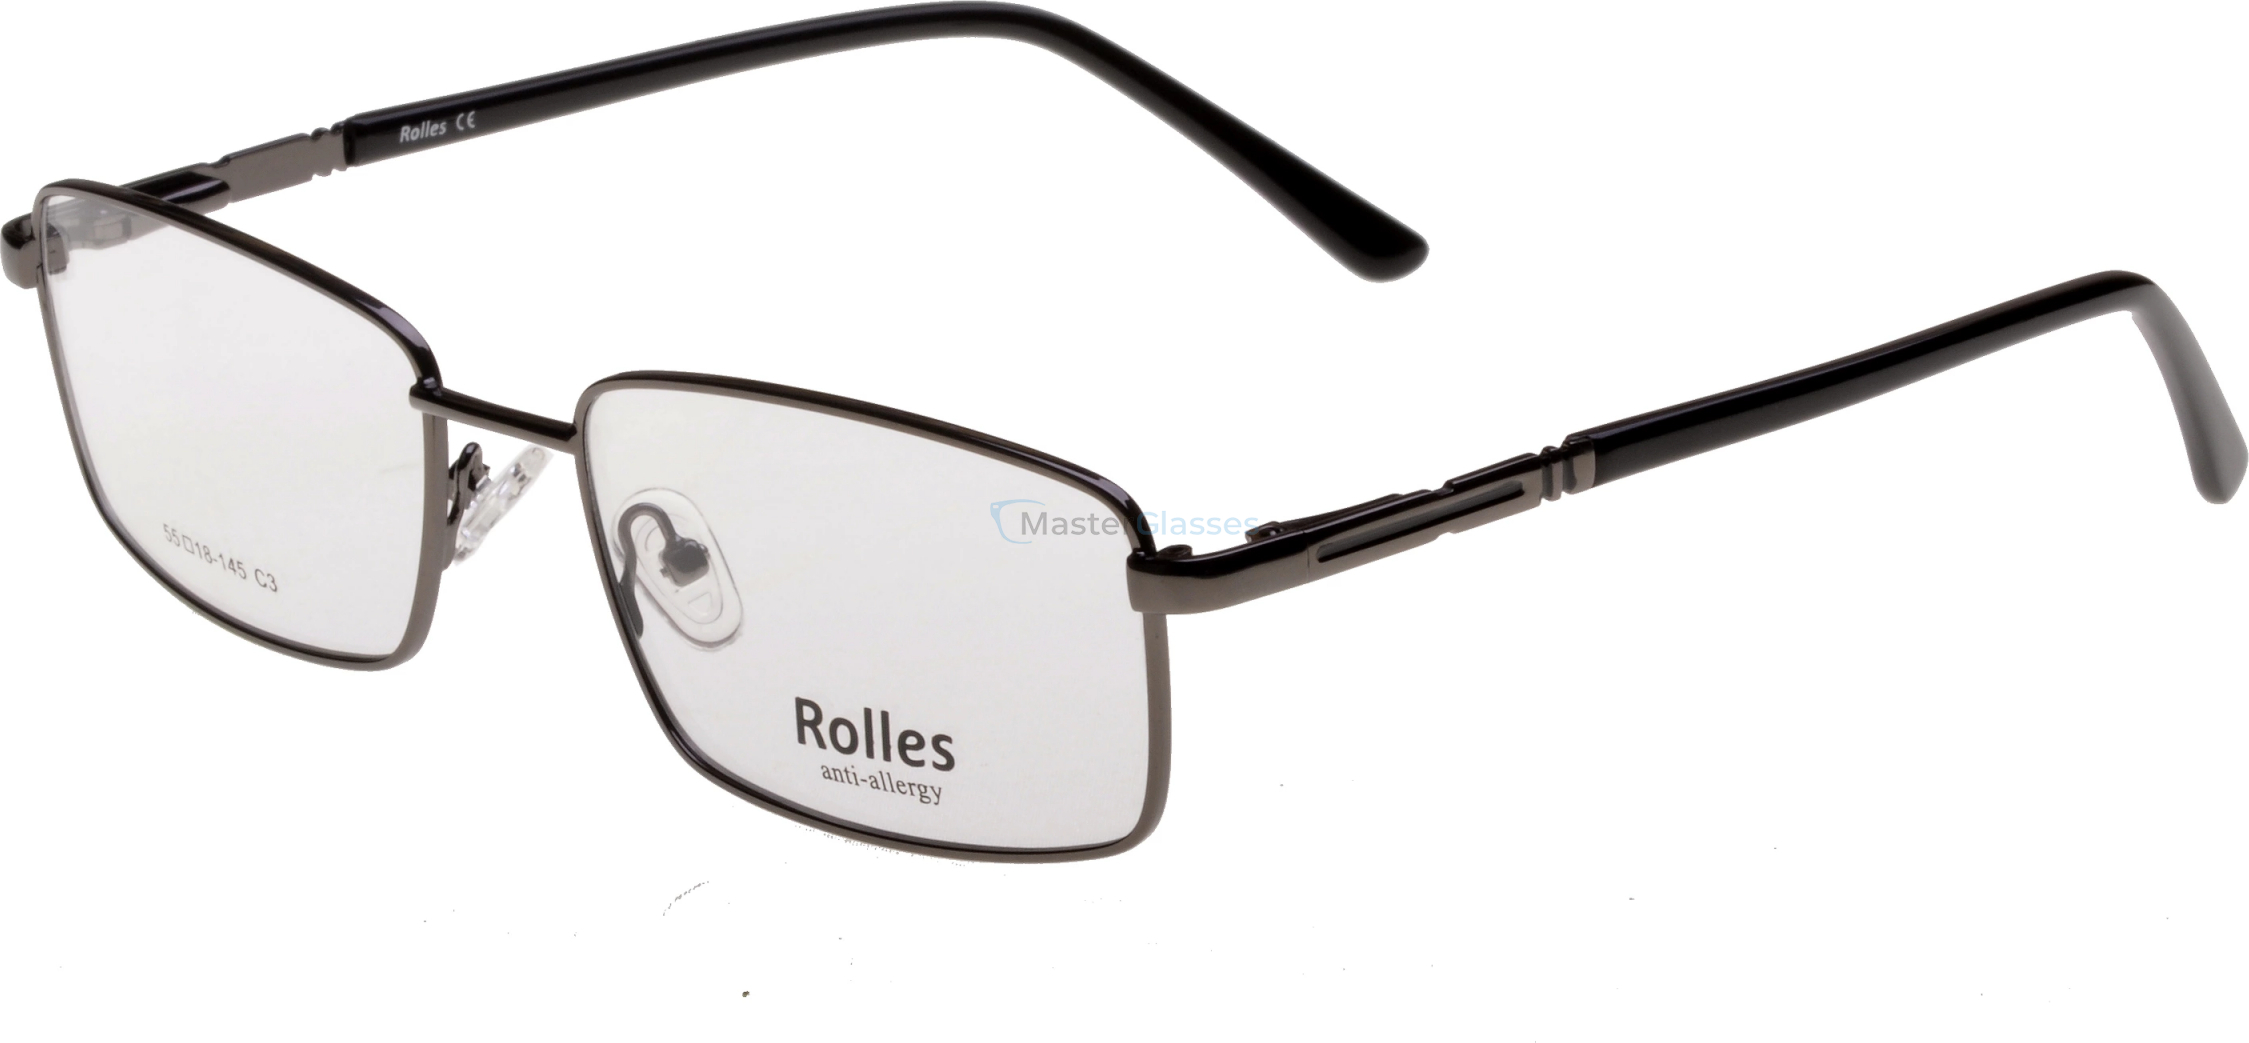  Rolles 359 03